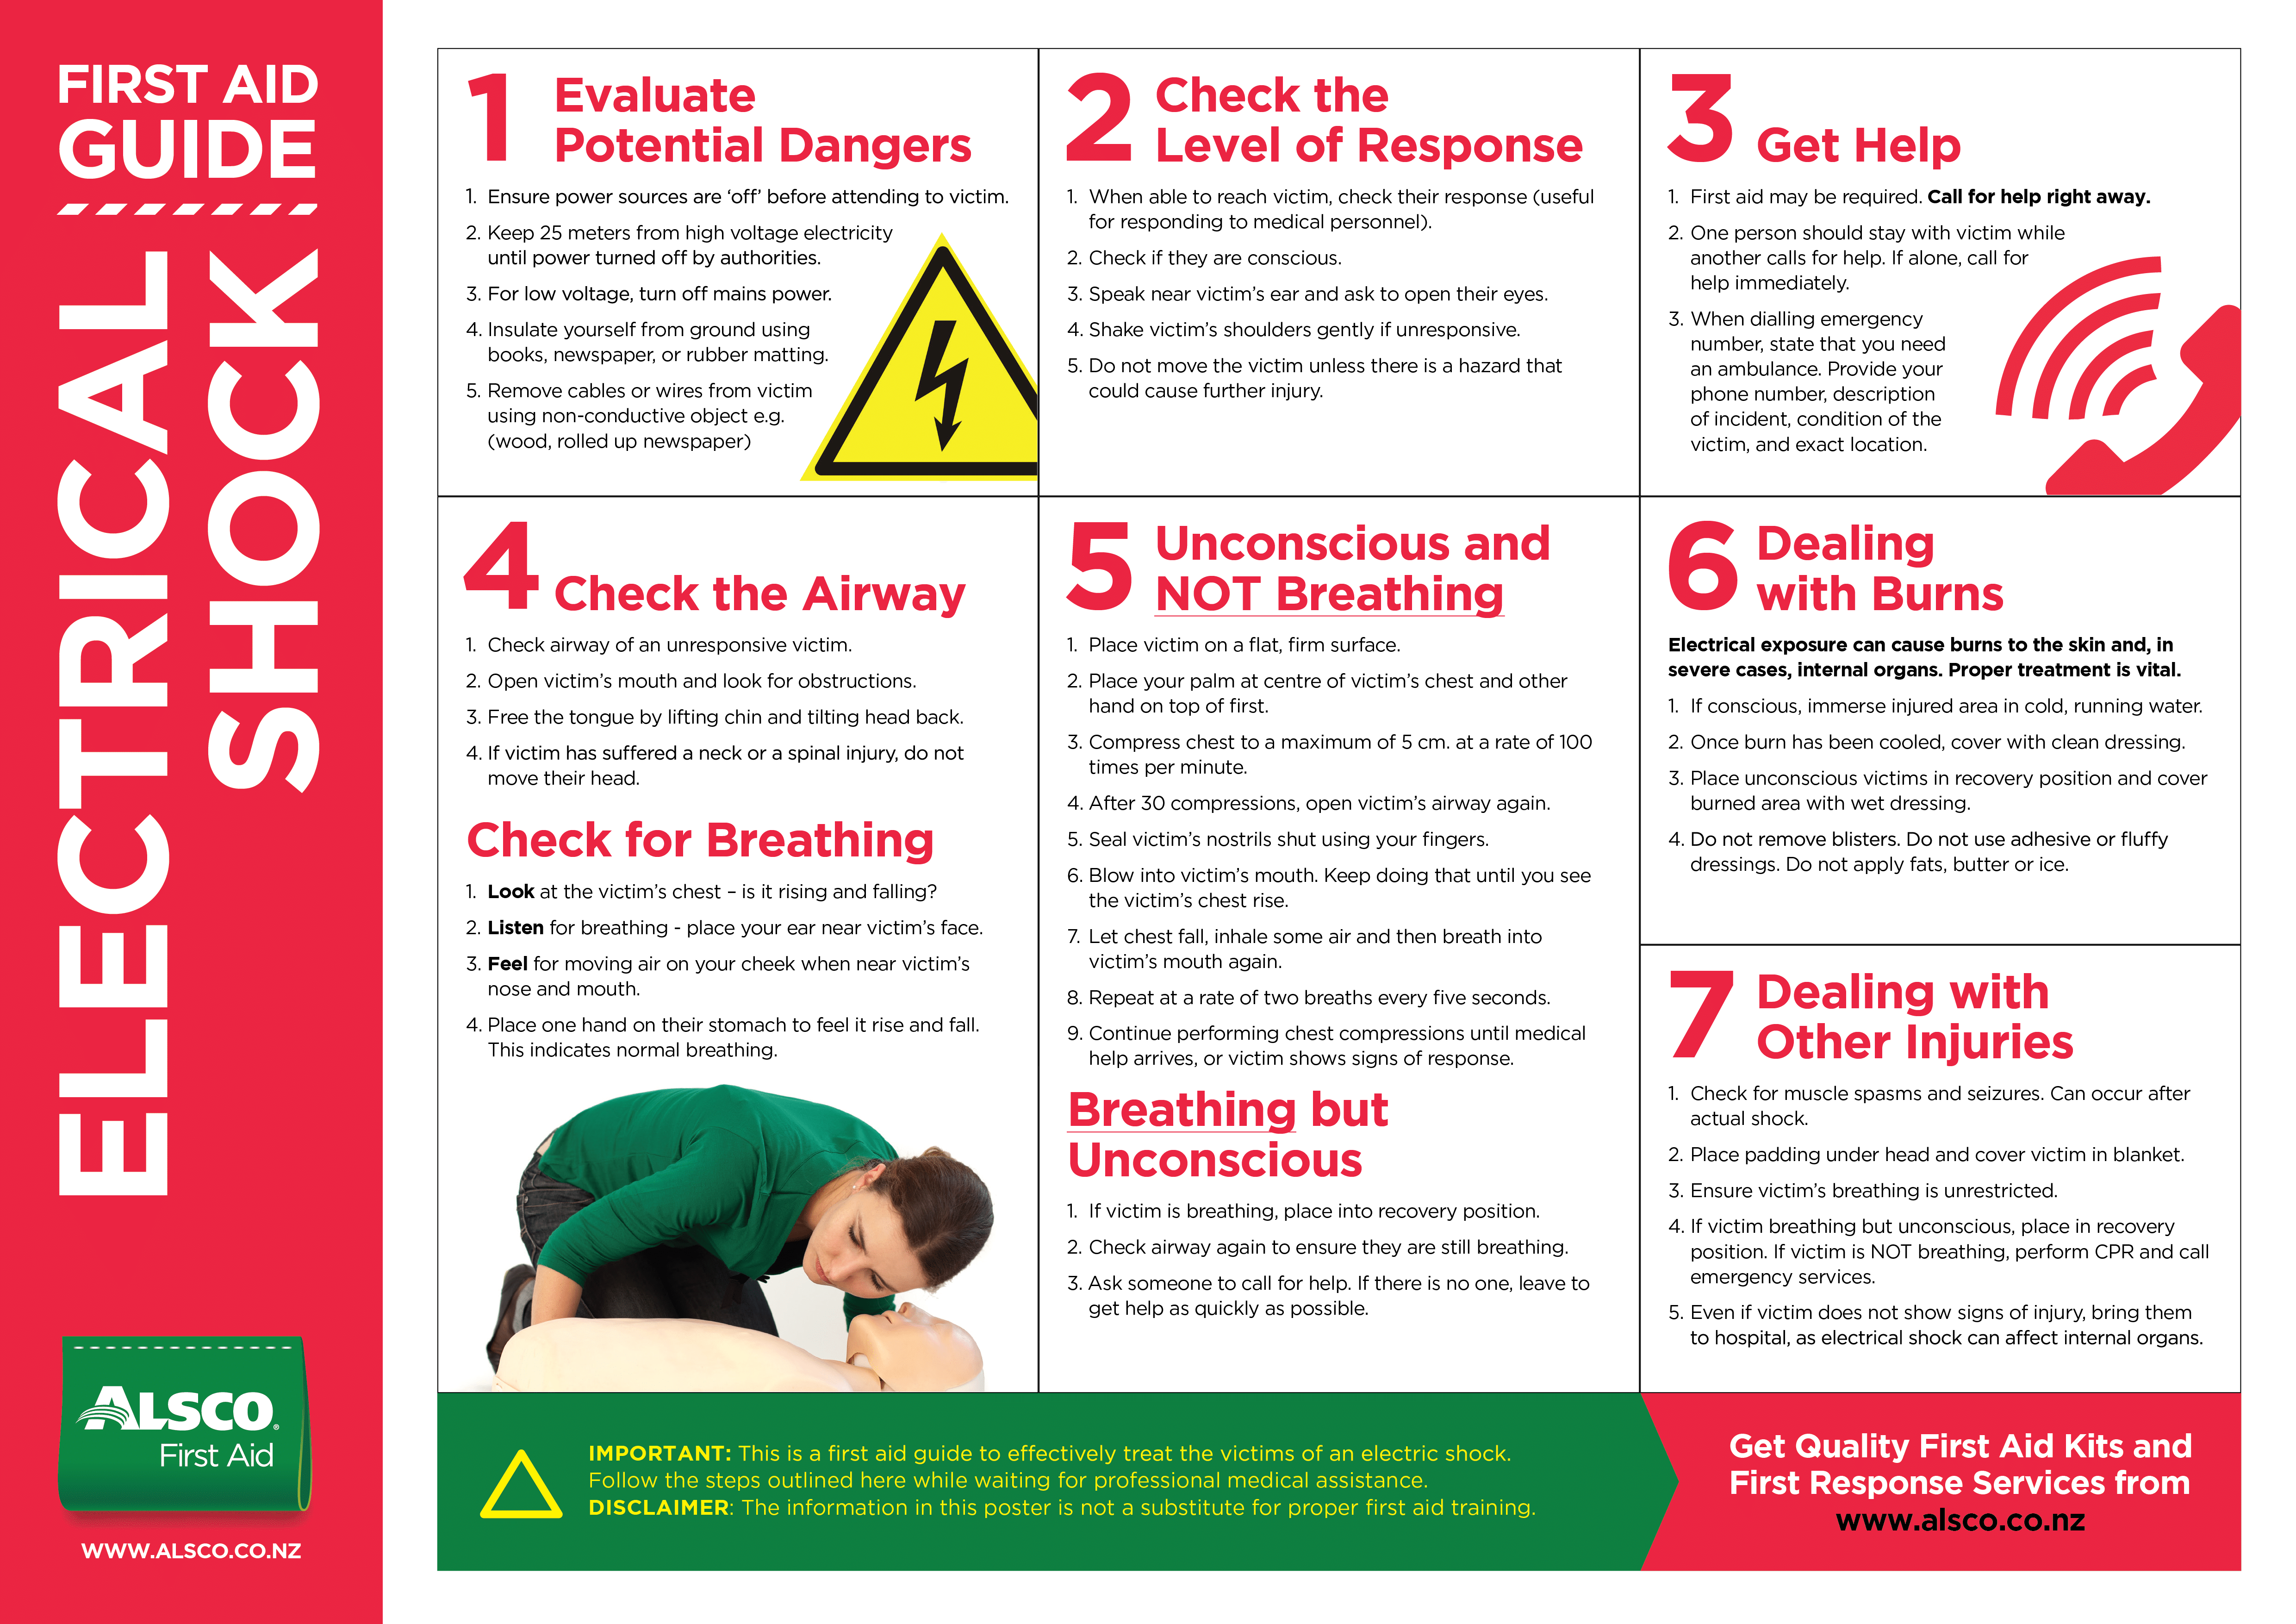 pdf-hse-electric-shock-first-aid-procedures-poster-pdf